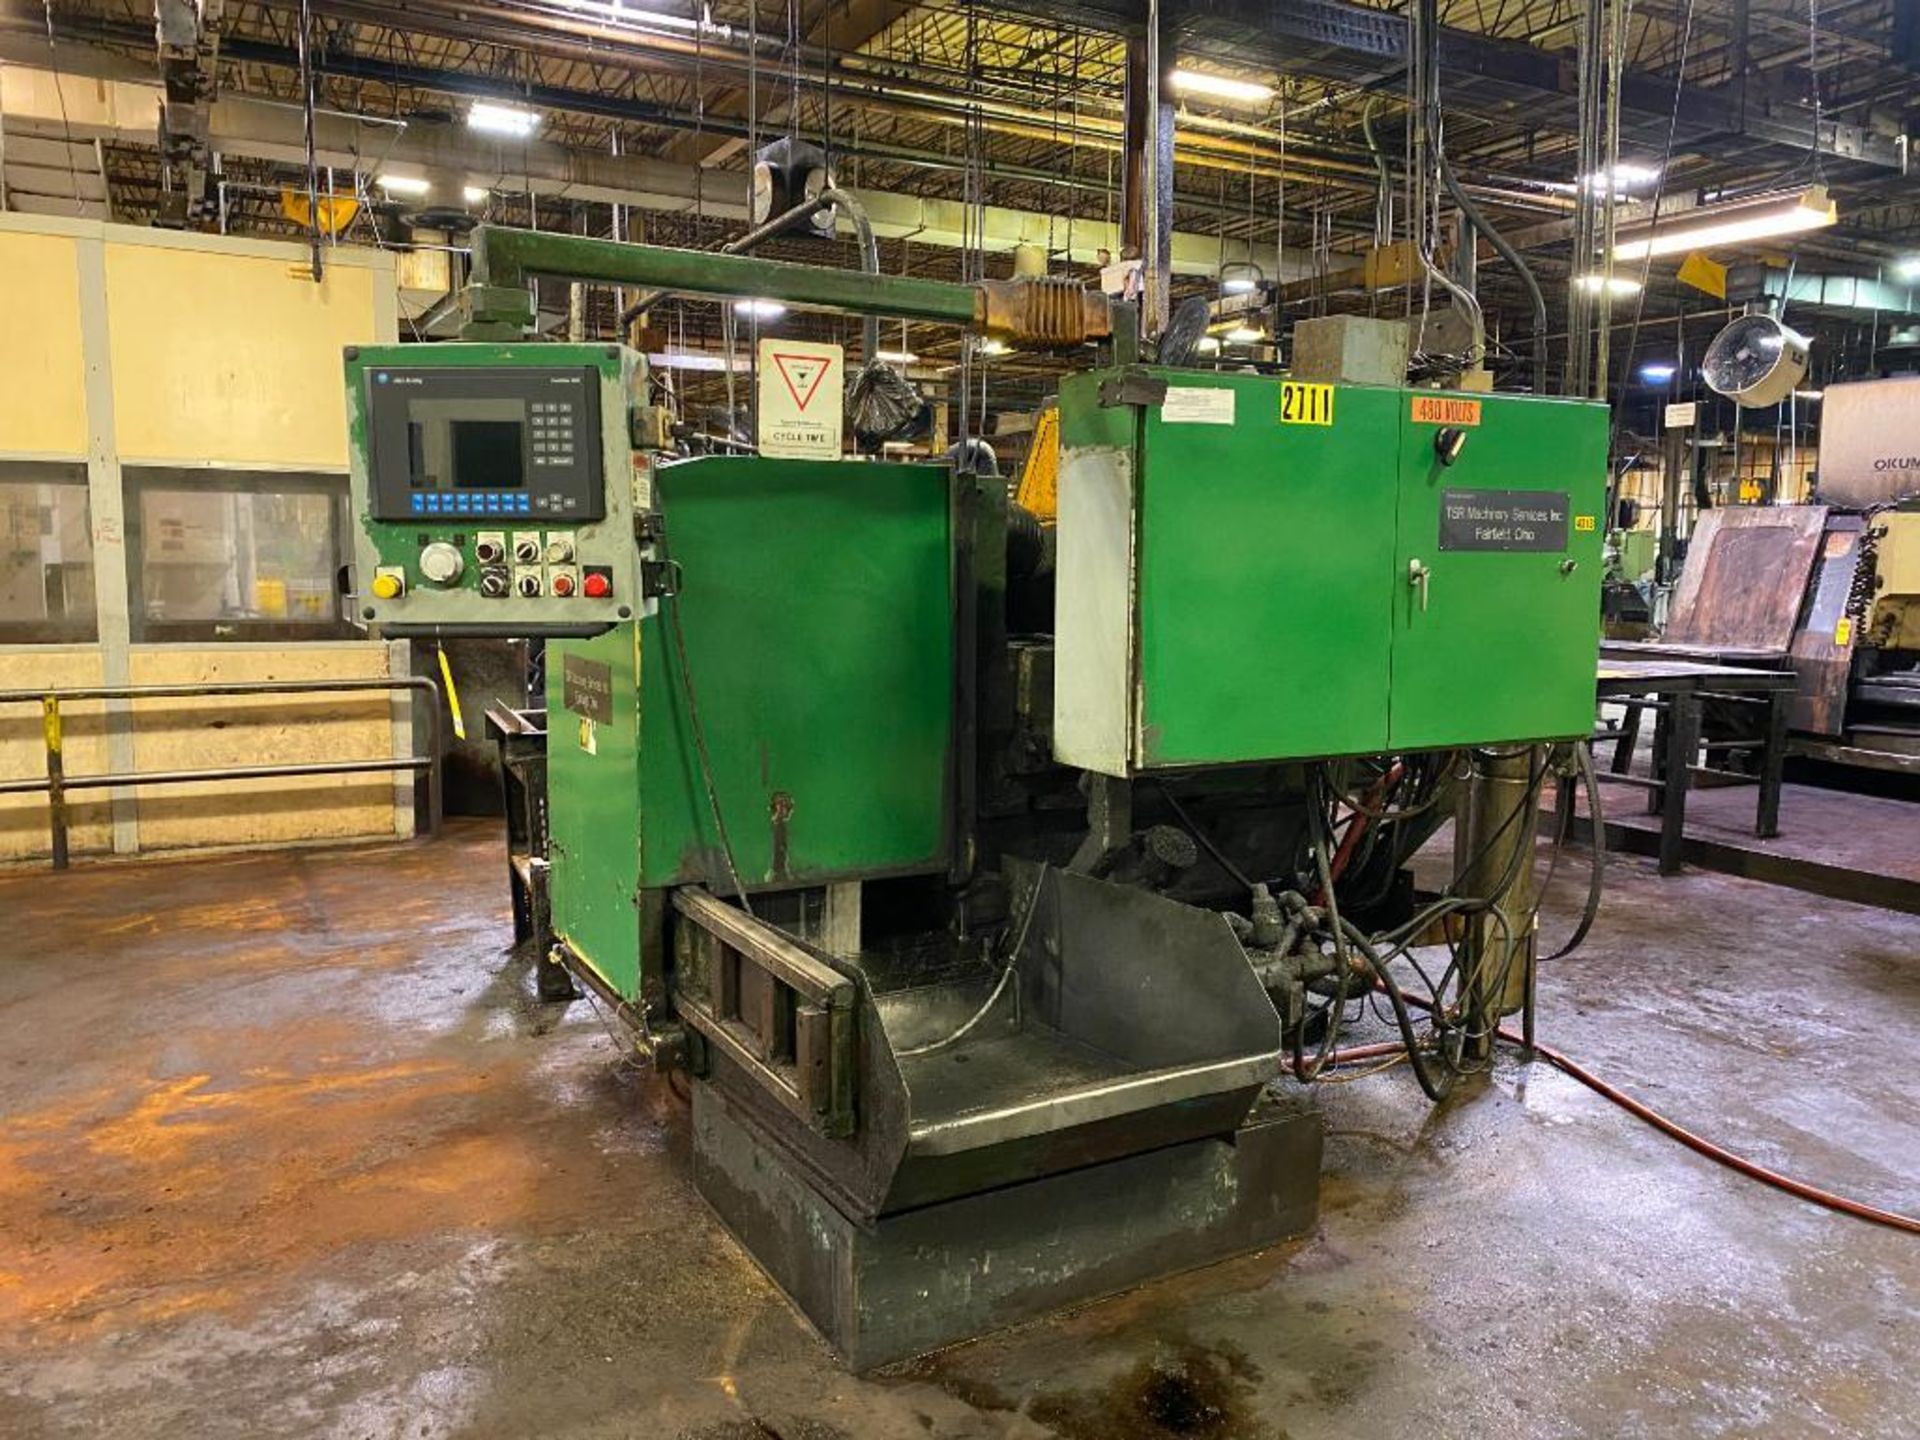 Ex-Cell-O Dual Head Grinder (Reman. By TSR), Allen-Bradley Panelview 1000 Control